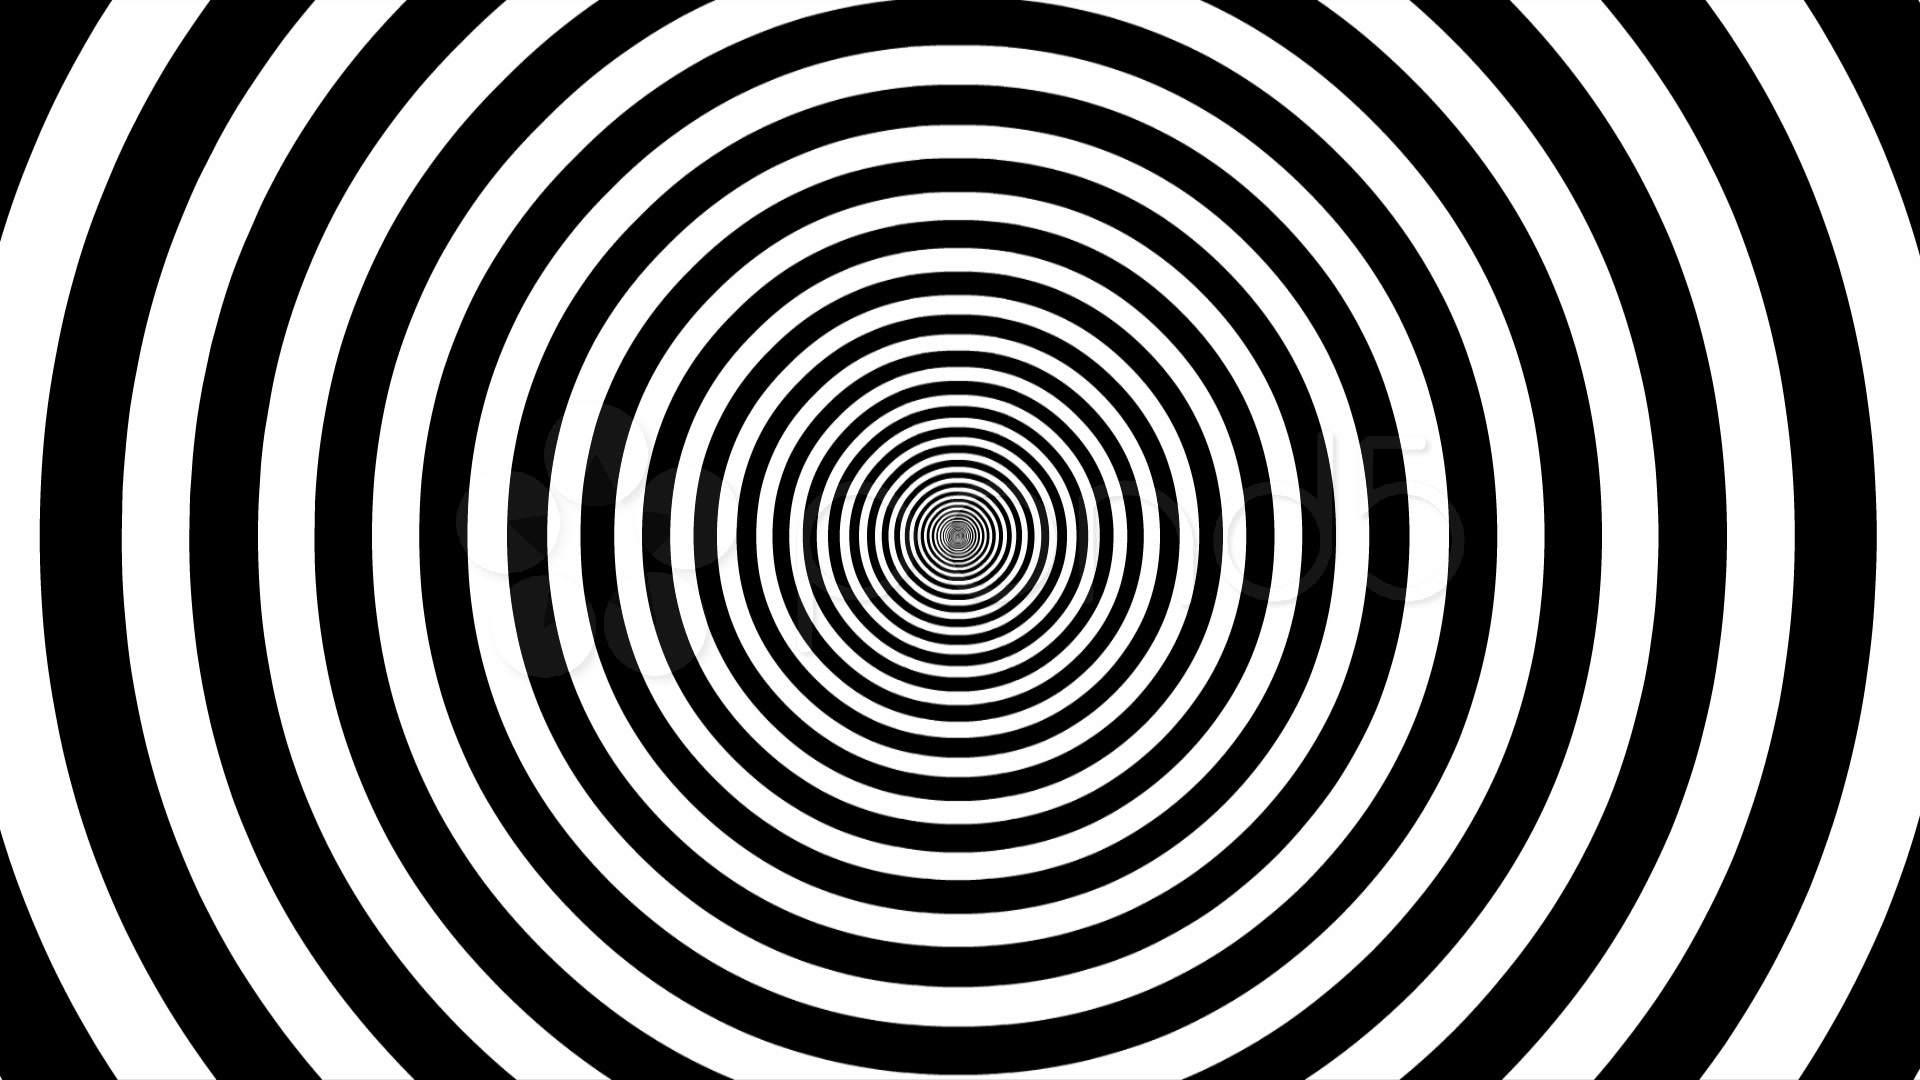 Target Tunnel Retro Spiral Animation Loop - White & Black videos 239457 | HD Stock Footage